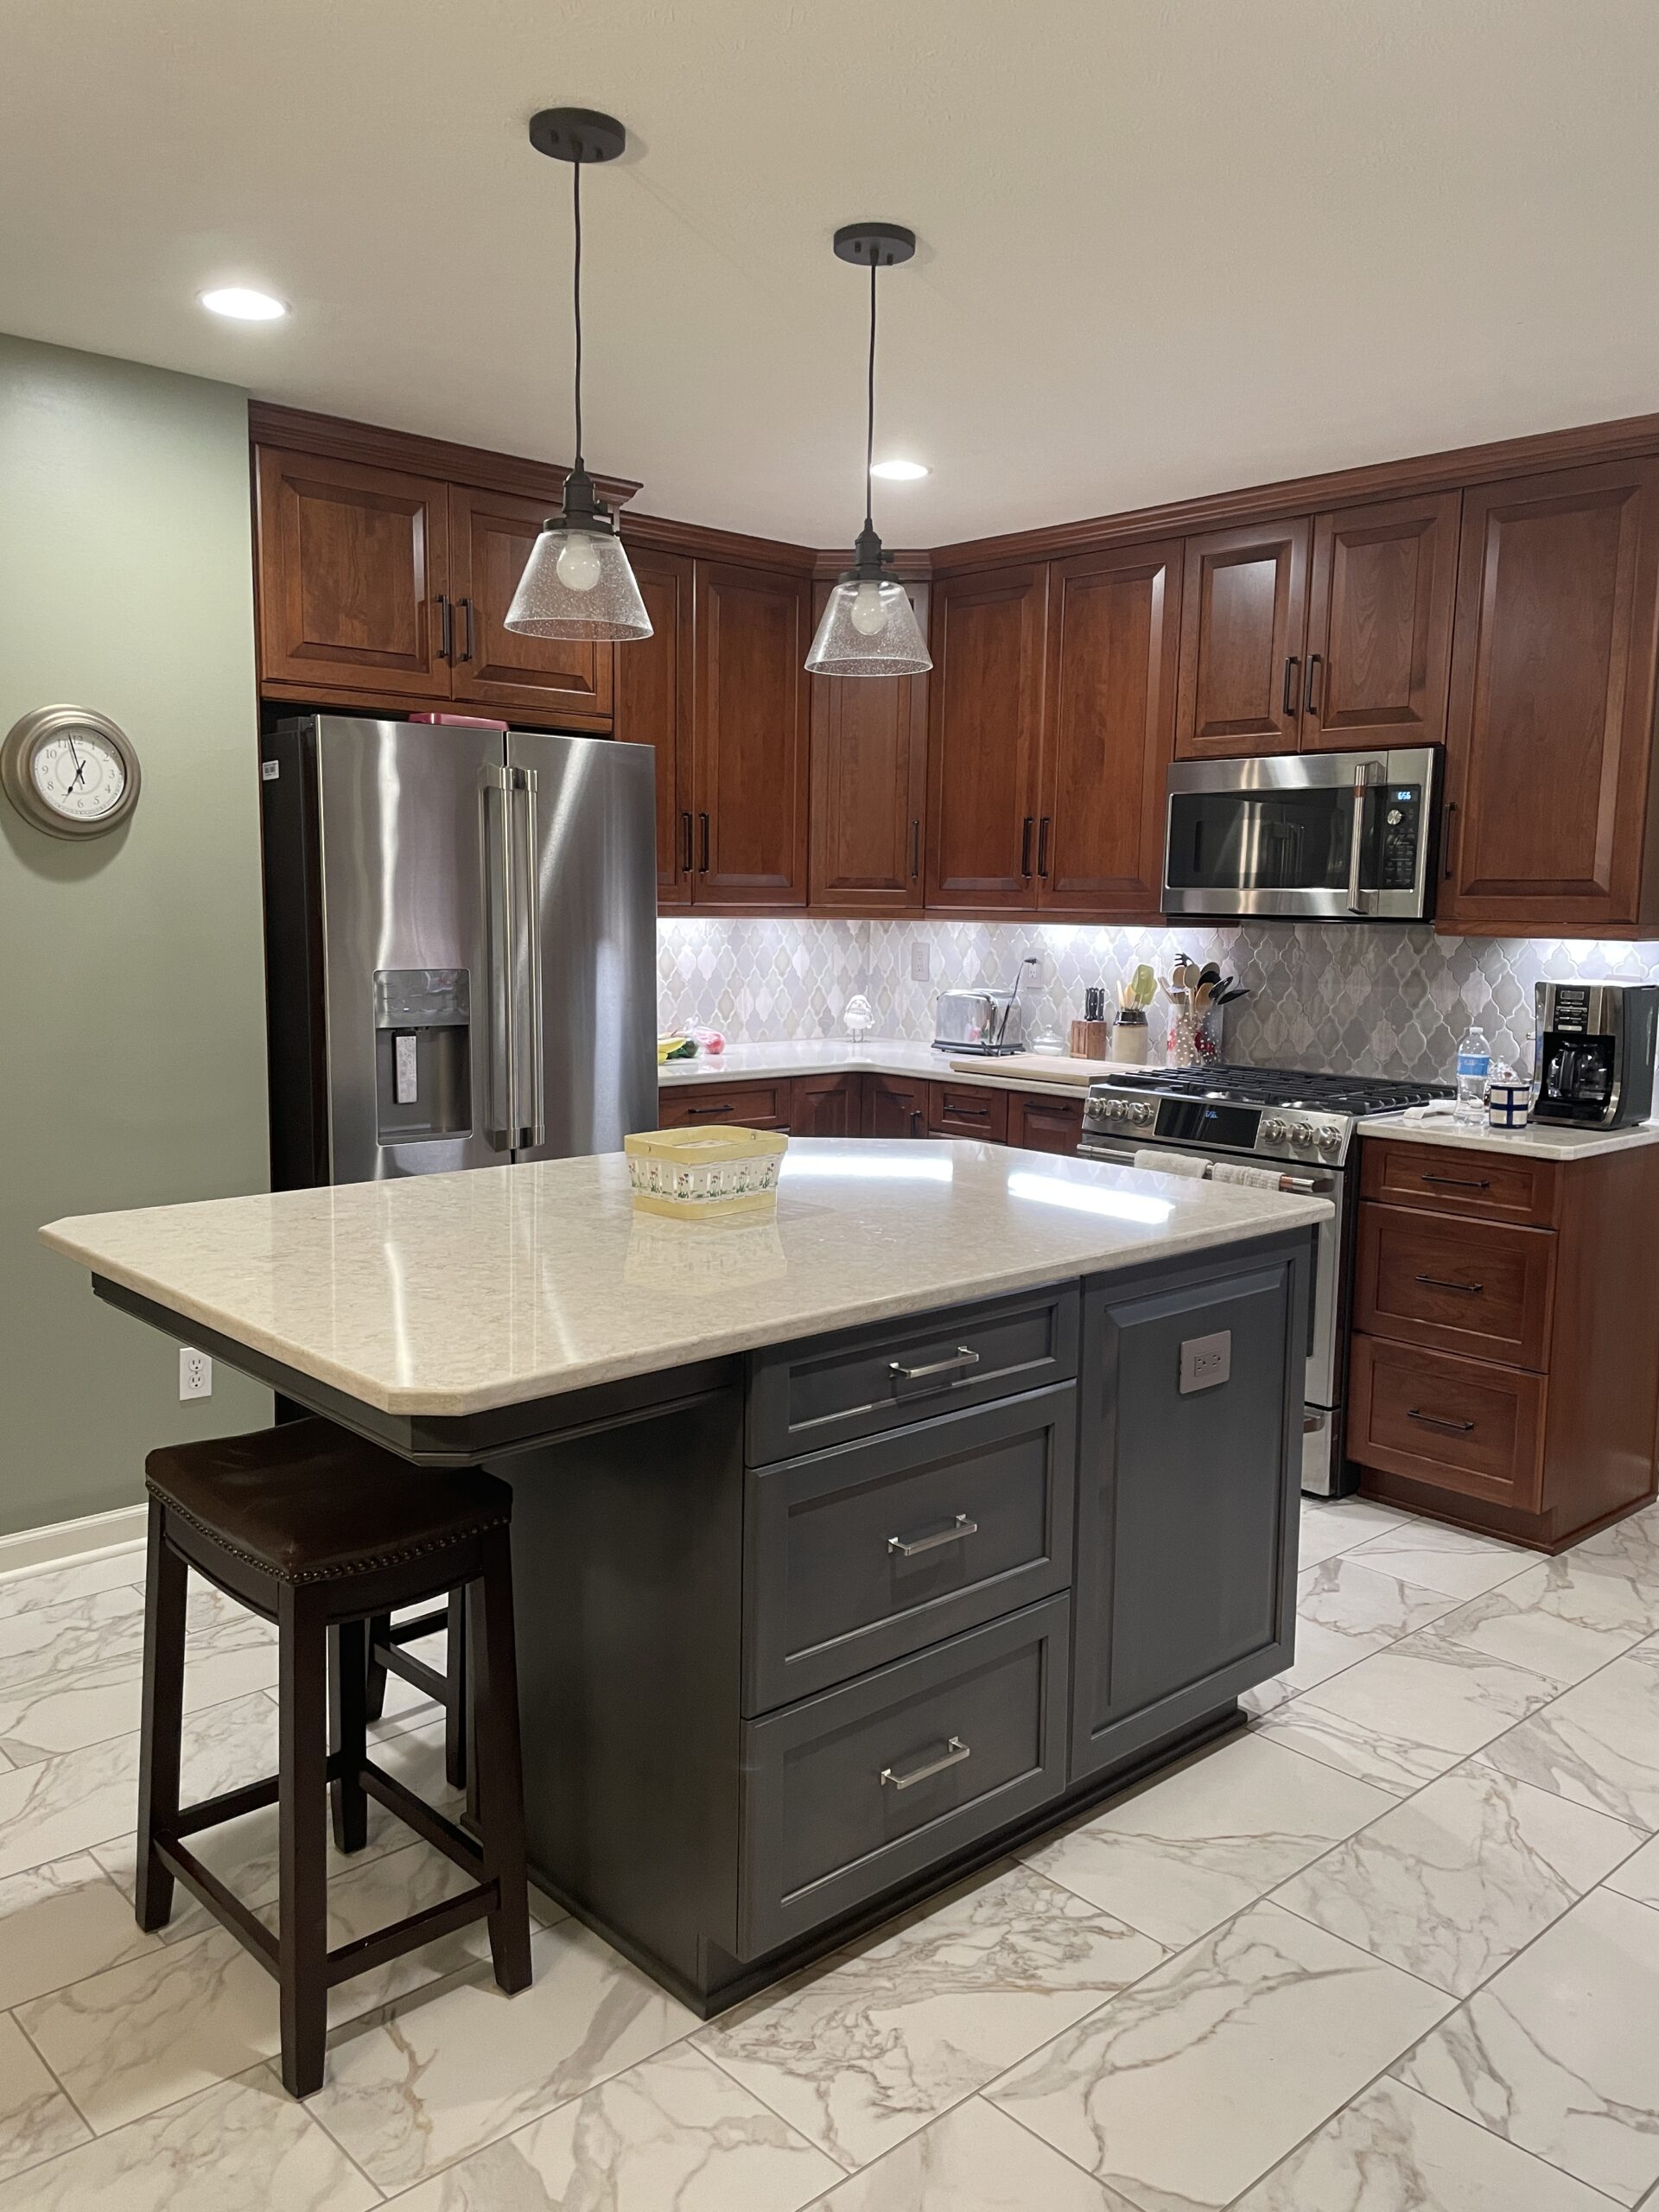 Classic kitchen, center island with white marble countertop, dark island drawers, brown cabinets and storage, arabesque tile backsplash, black and white floor tiles, light green wall